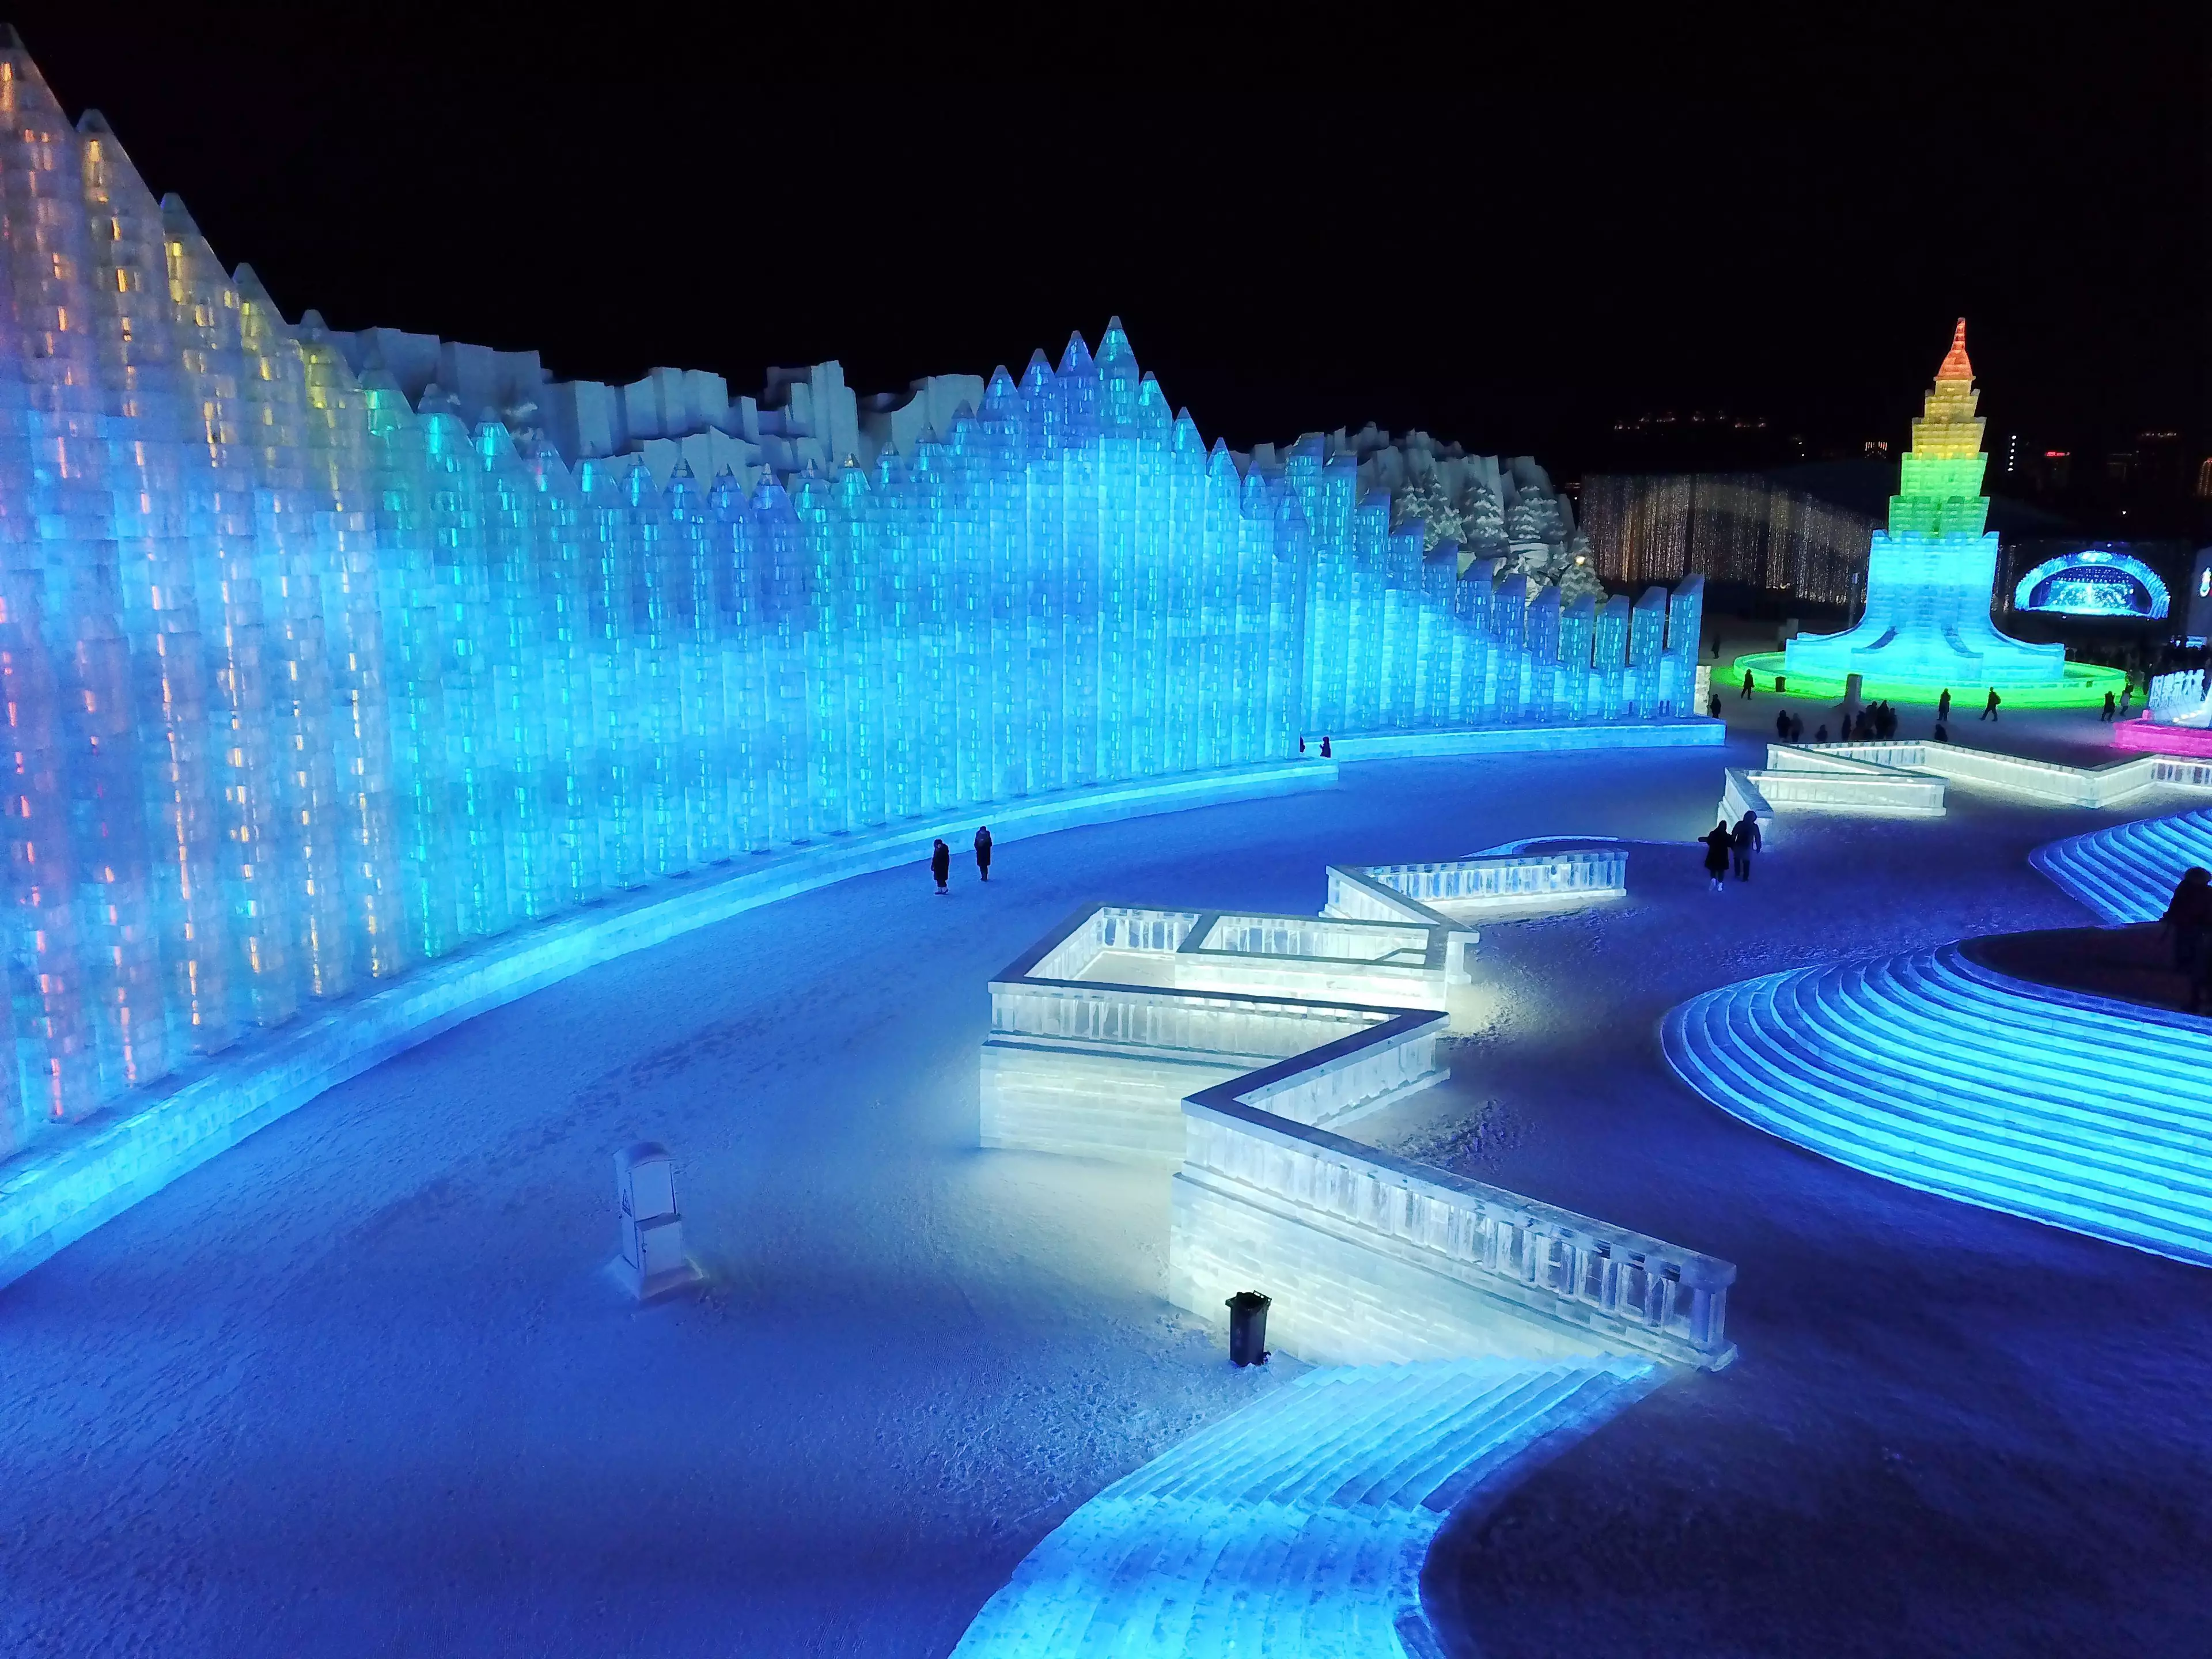 Sculptures are made from 220,000 cubic metres of ice (